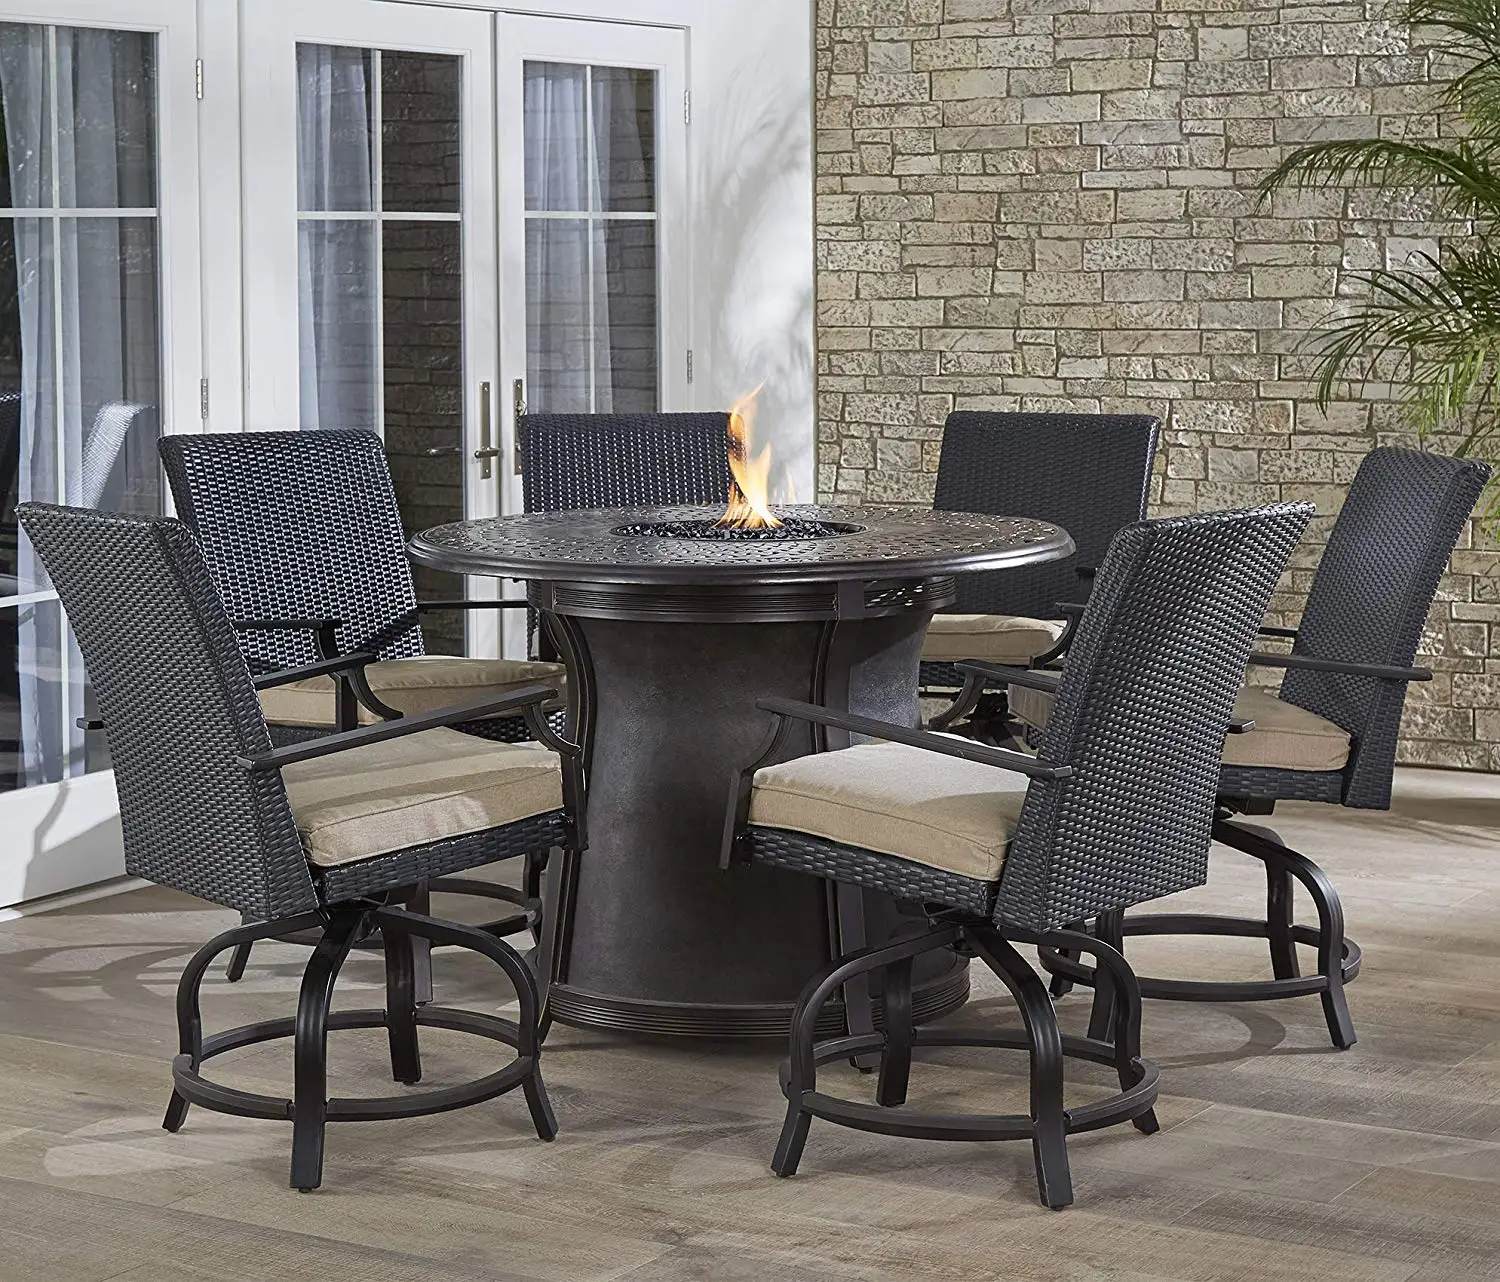 Cheap Fire Pit Dining Table Set, find Fire Pit Dining Table Set deals